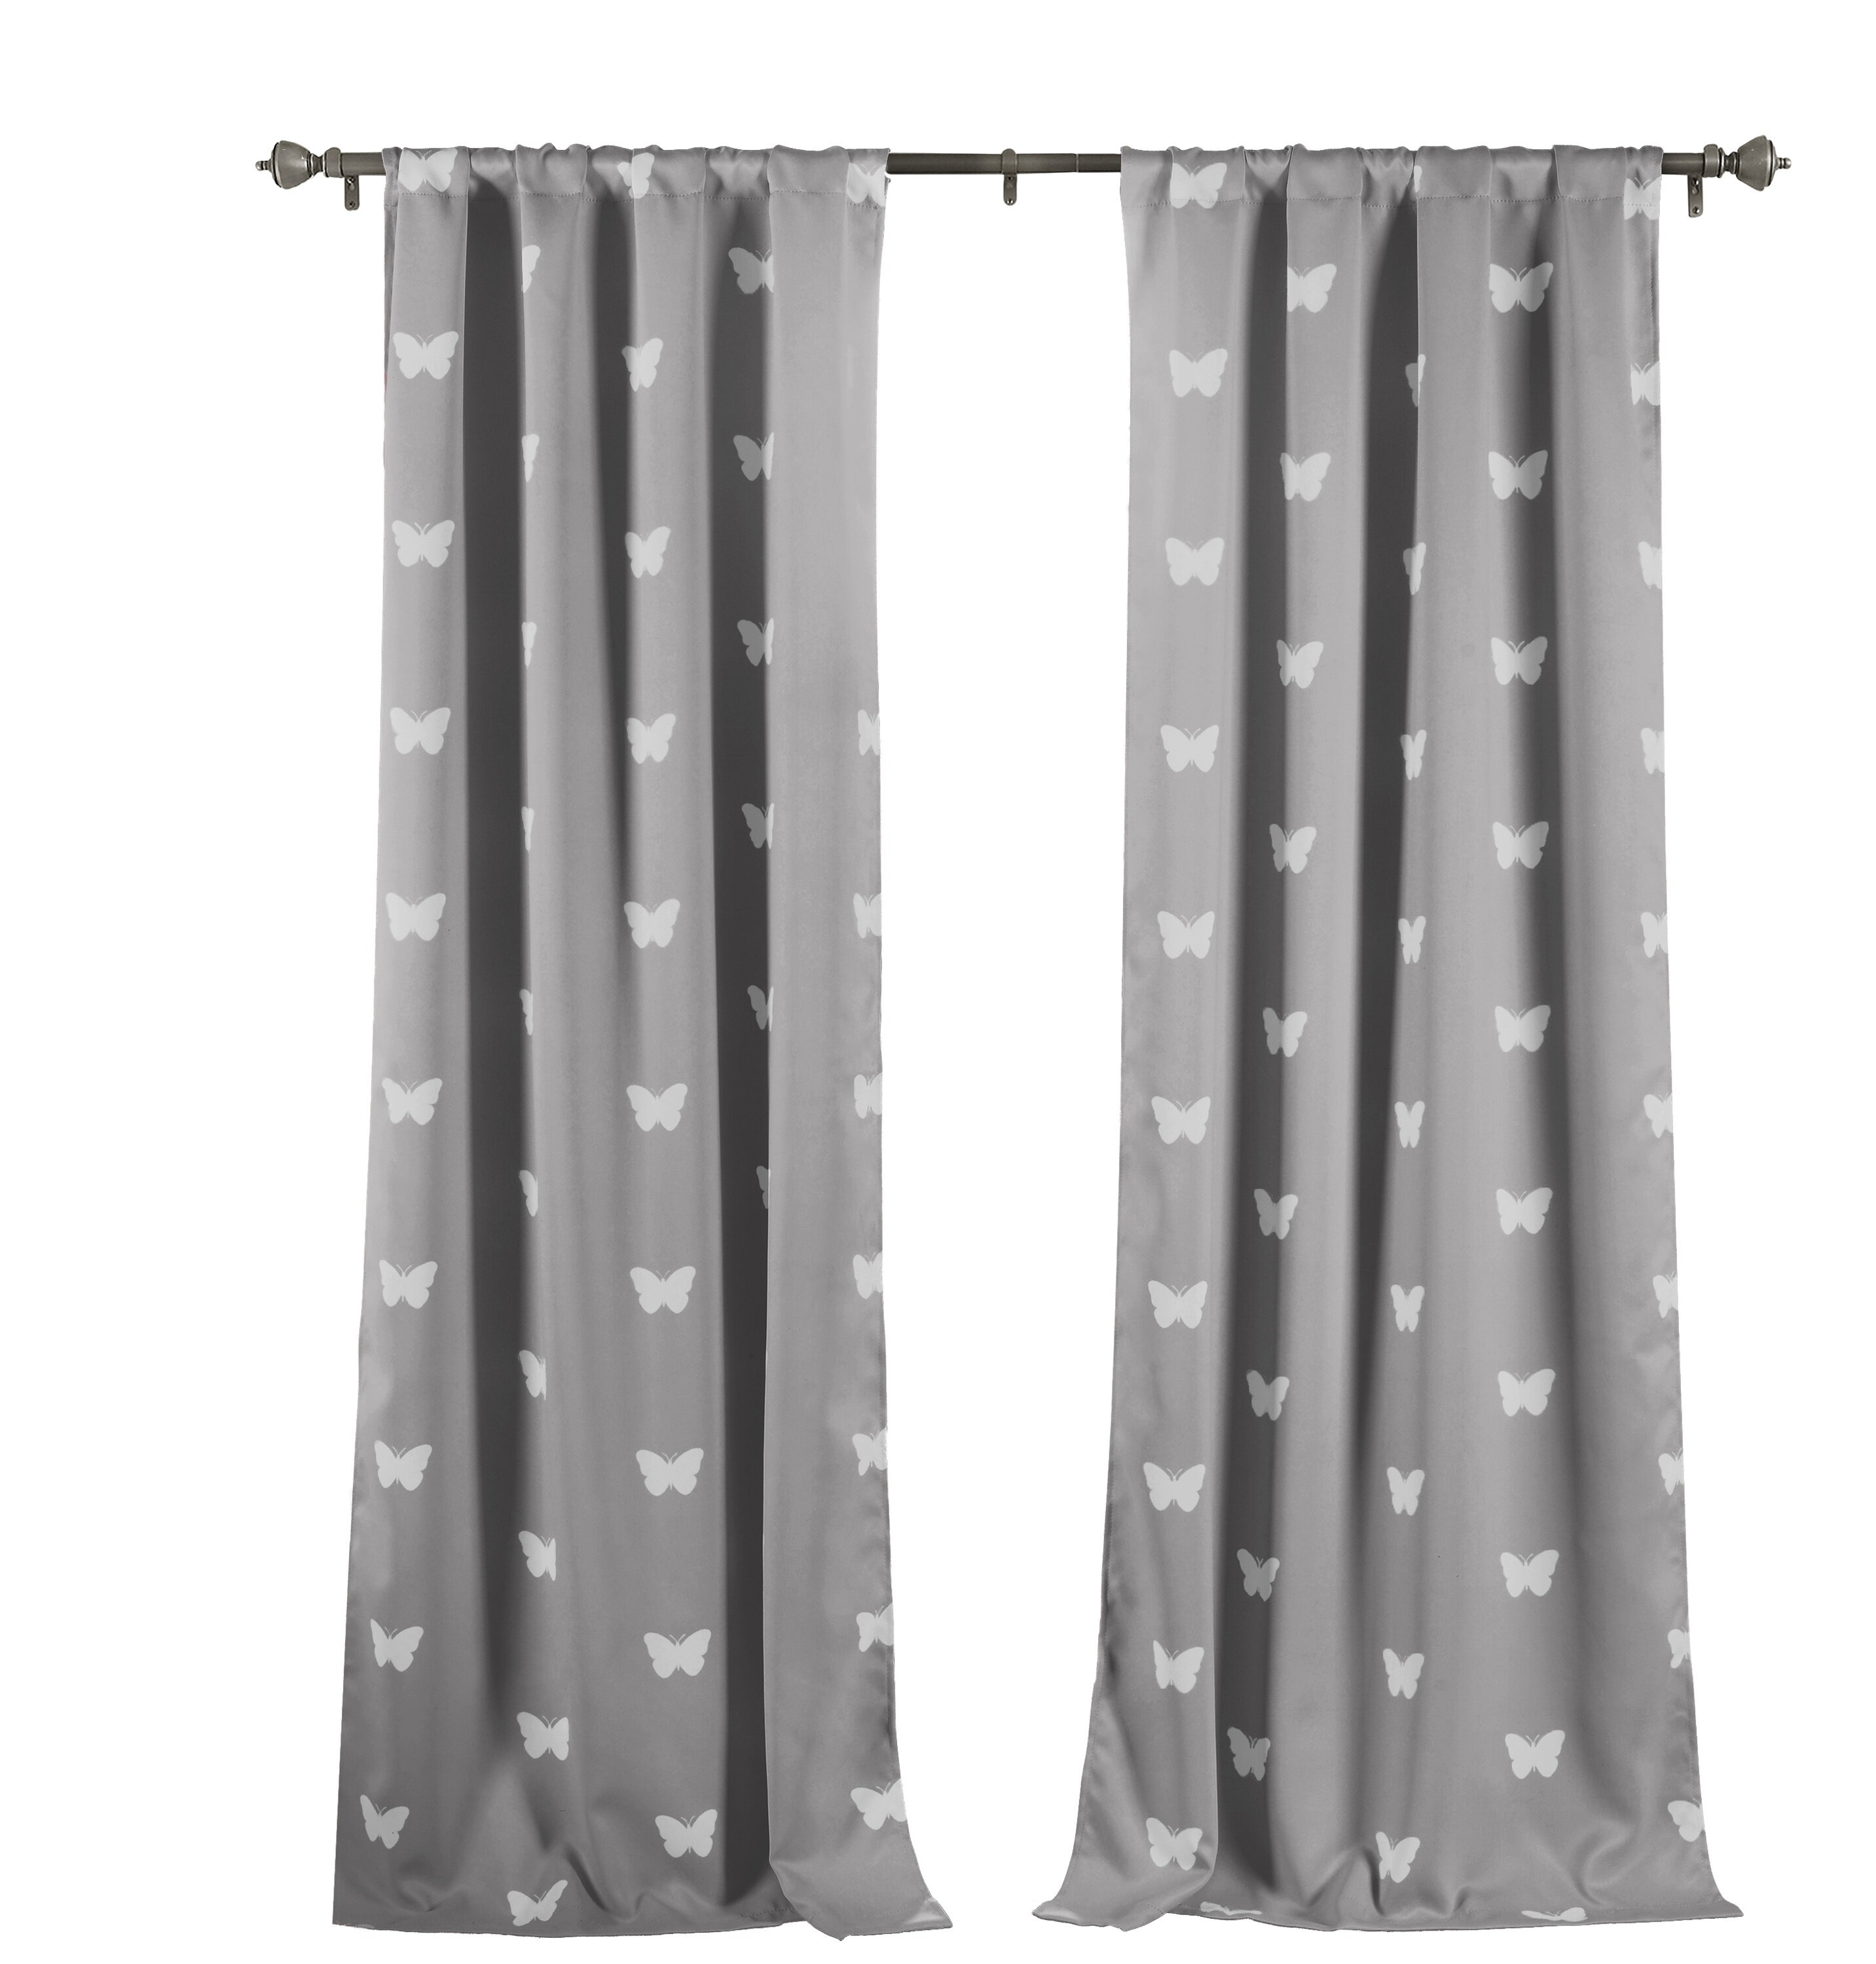 Set of 2 Butterfly Print Blackout Thermal Pole Top Window Curtains Pair Panel 